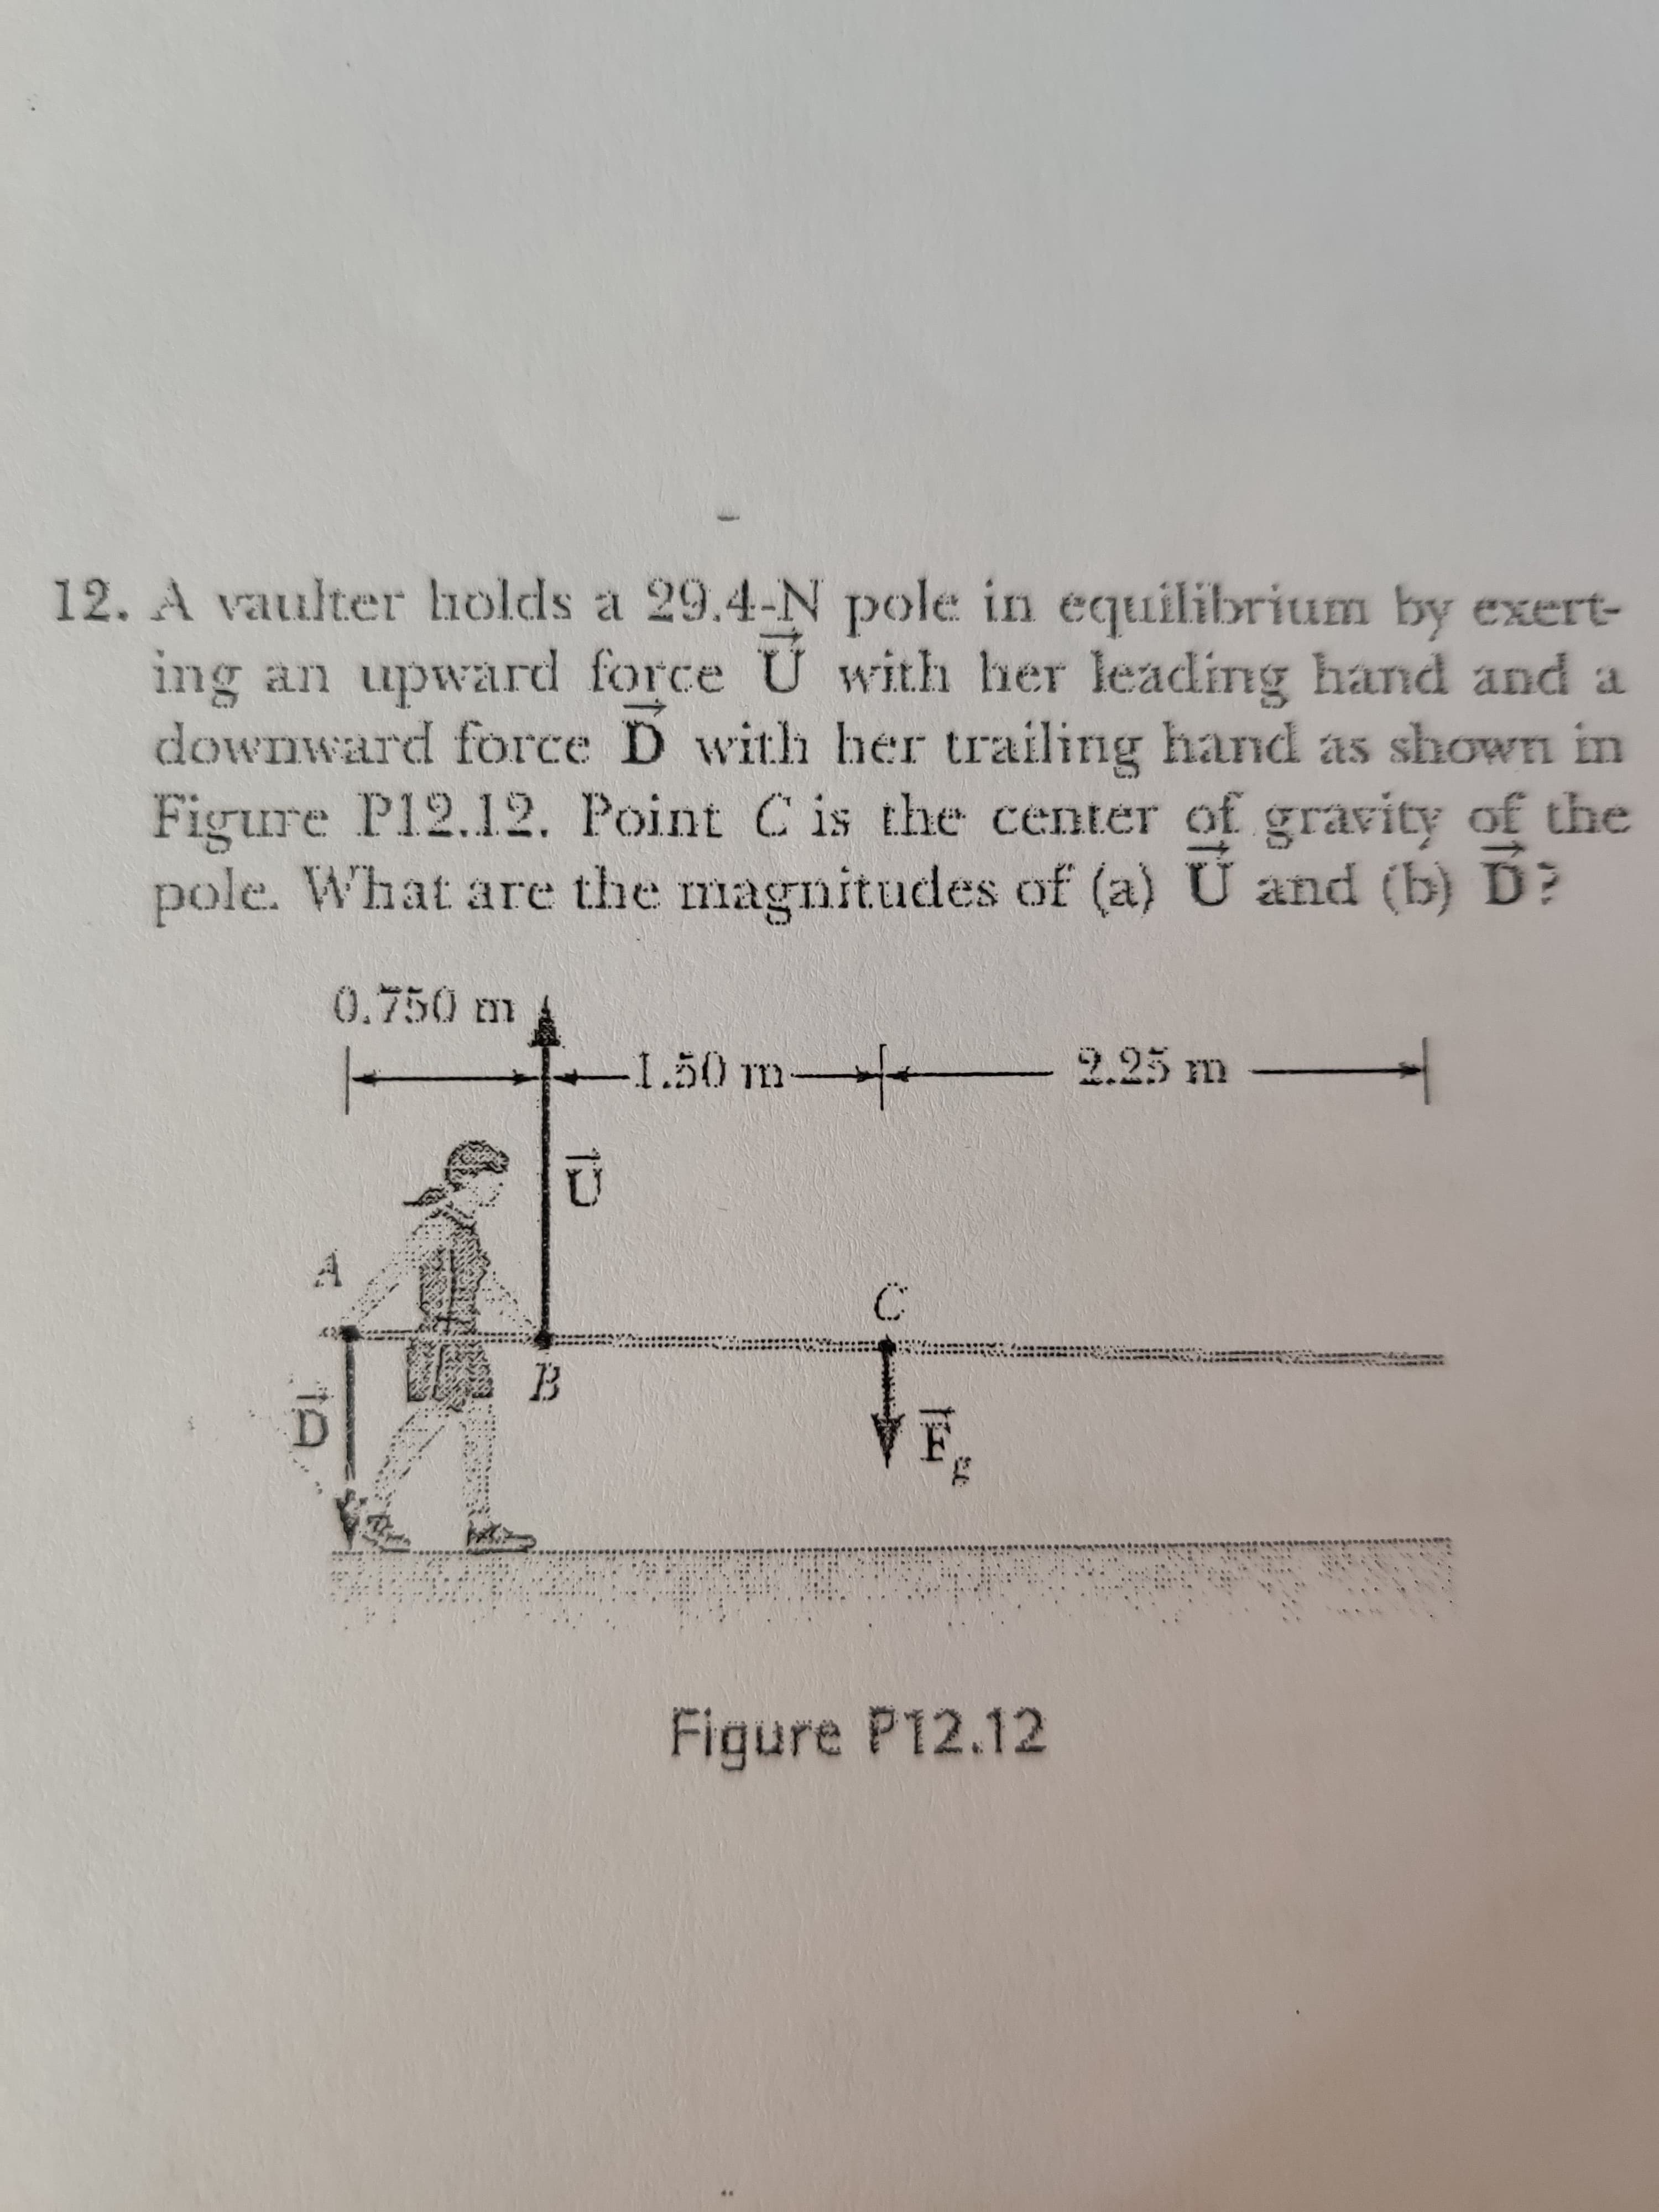 12. A vaulter holds a 29.4-N pole in equilibrium by exert-
ing an upward force U with her leading hand and a
downward force D with her trailing hand as shoWn in
Figure P12.12. Point Cis the center of gravity of the
pole. What are the magnitudes of (a) U and (b) D?
1.50 m +
2.25 m
:-
Figure P12.12
